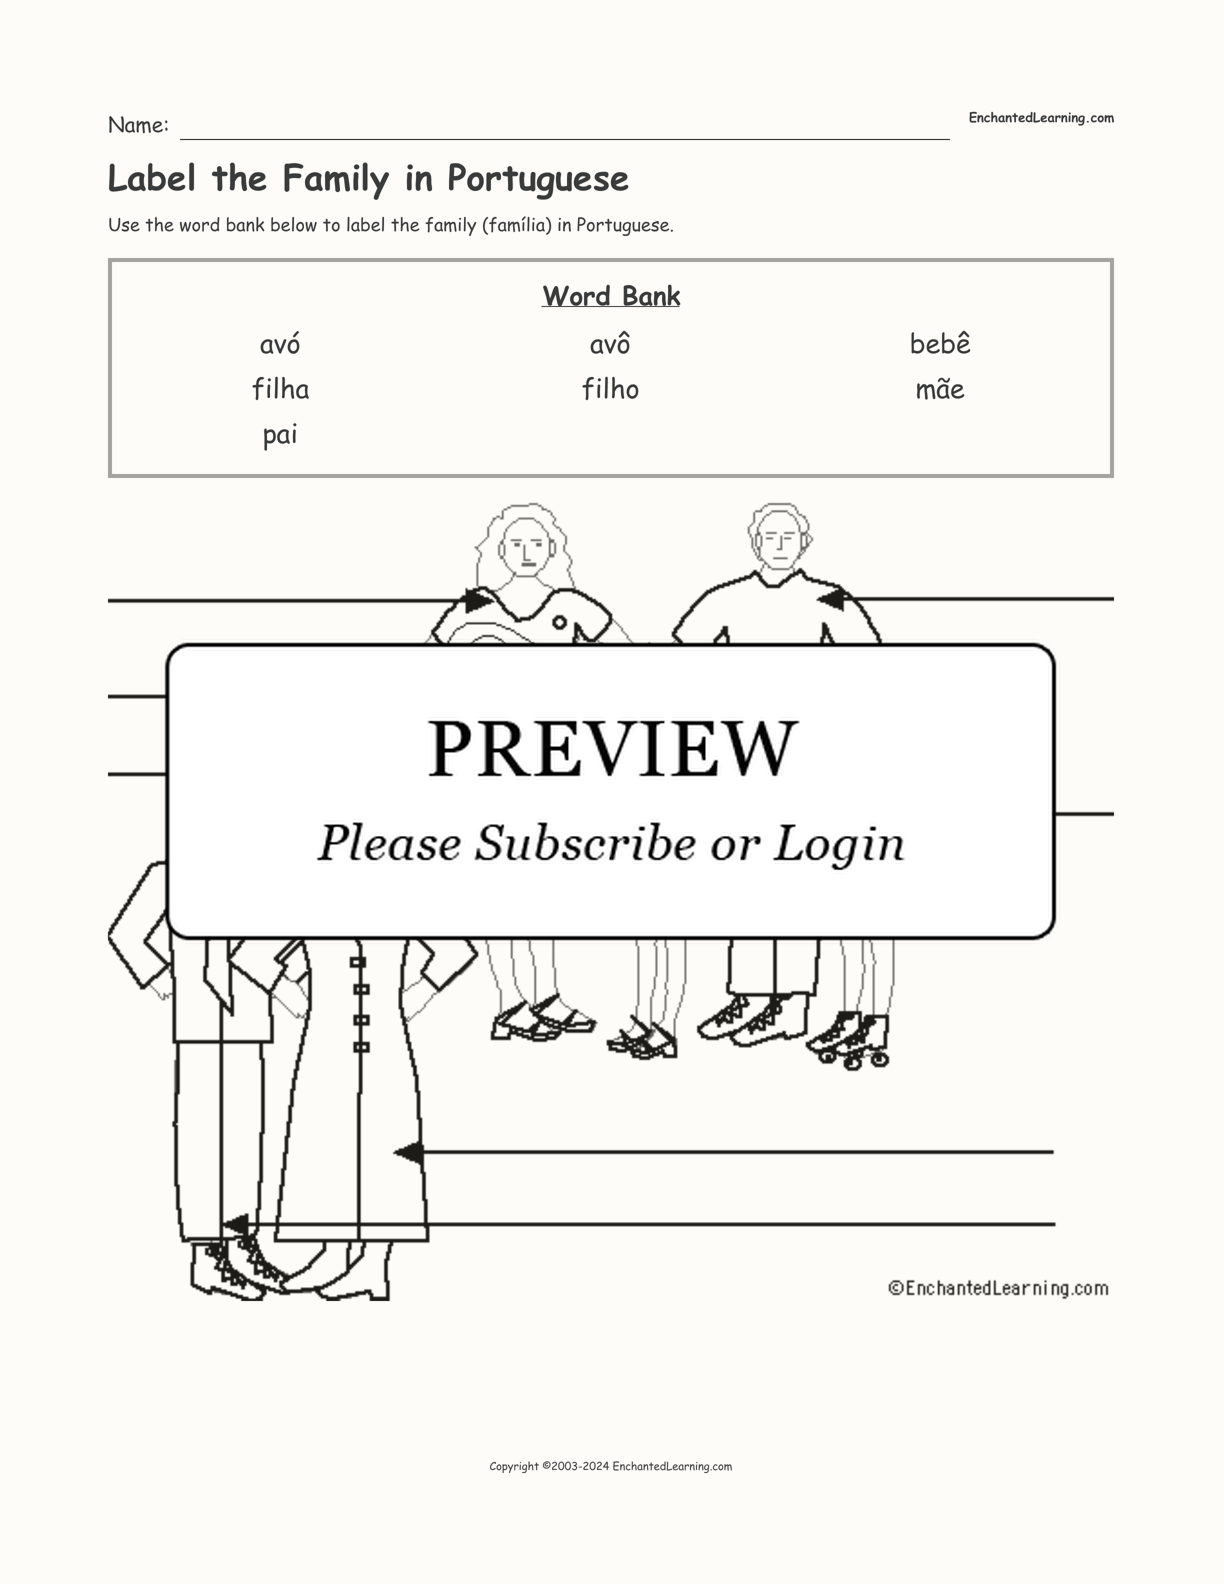 Label the Family in Portuguese interactive worksheet page 1